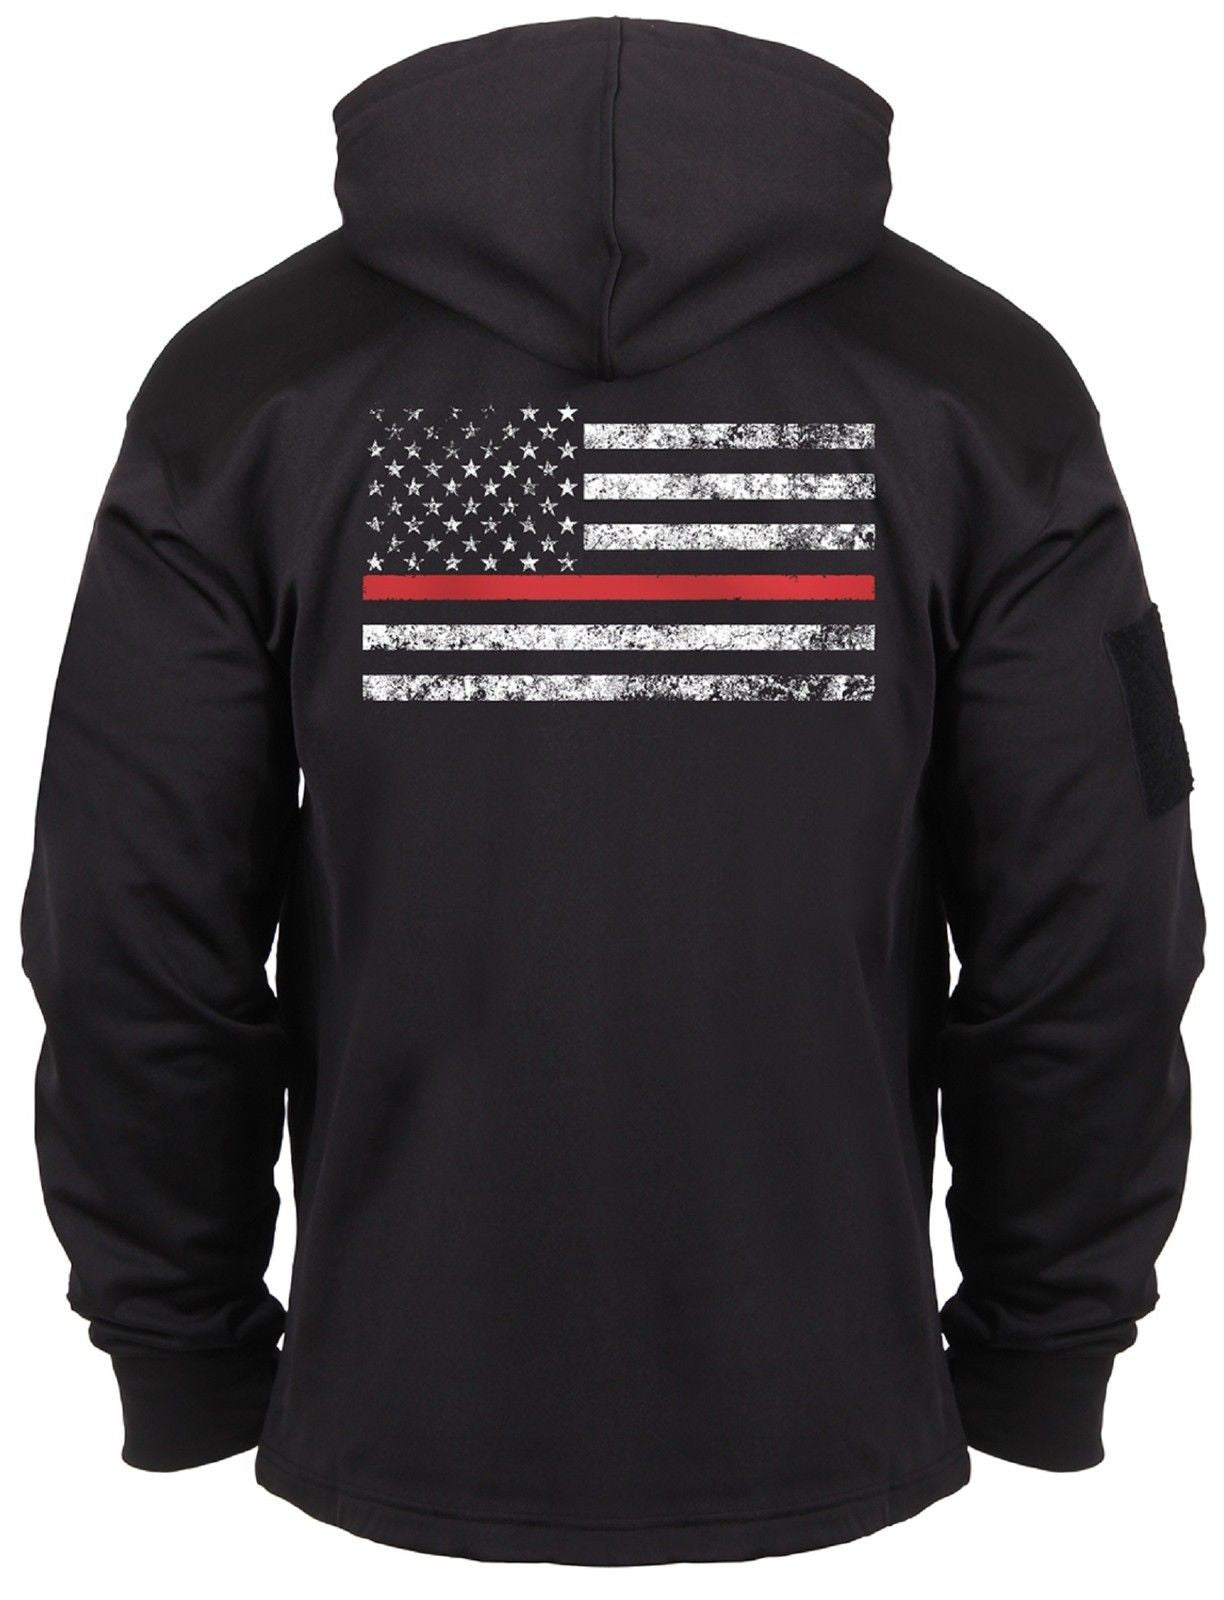 Thin Red Line Concealed Carry Hooded Sweatshirt - Black Firemans Hoodie & Patch